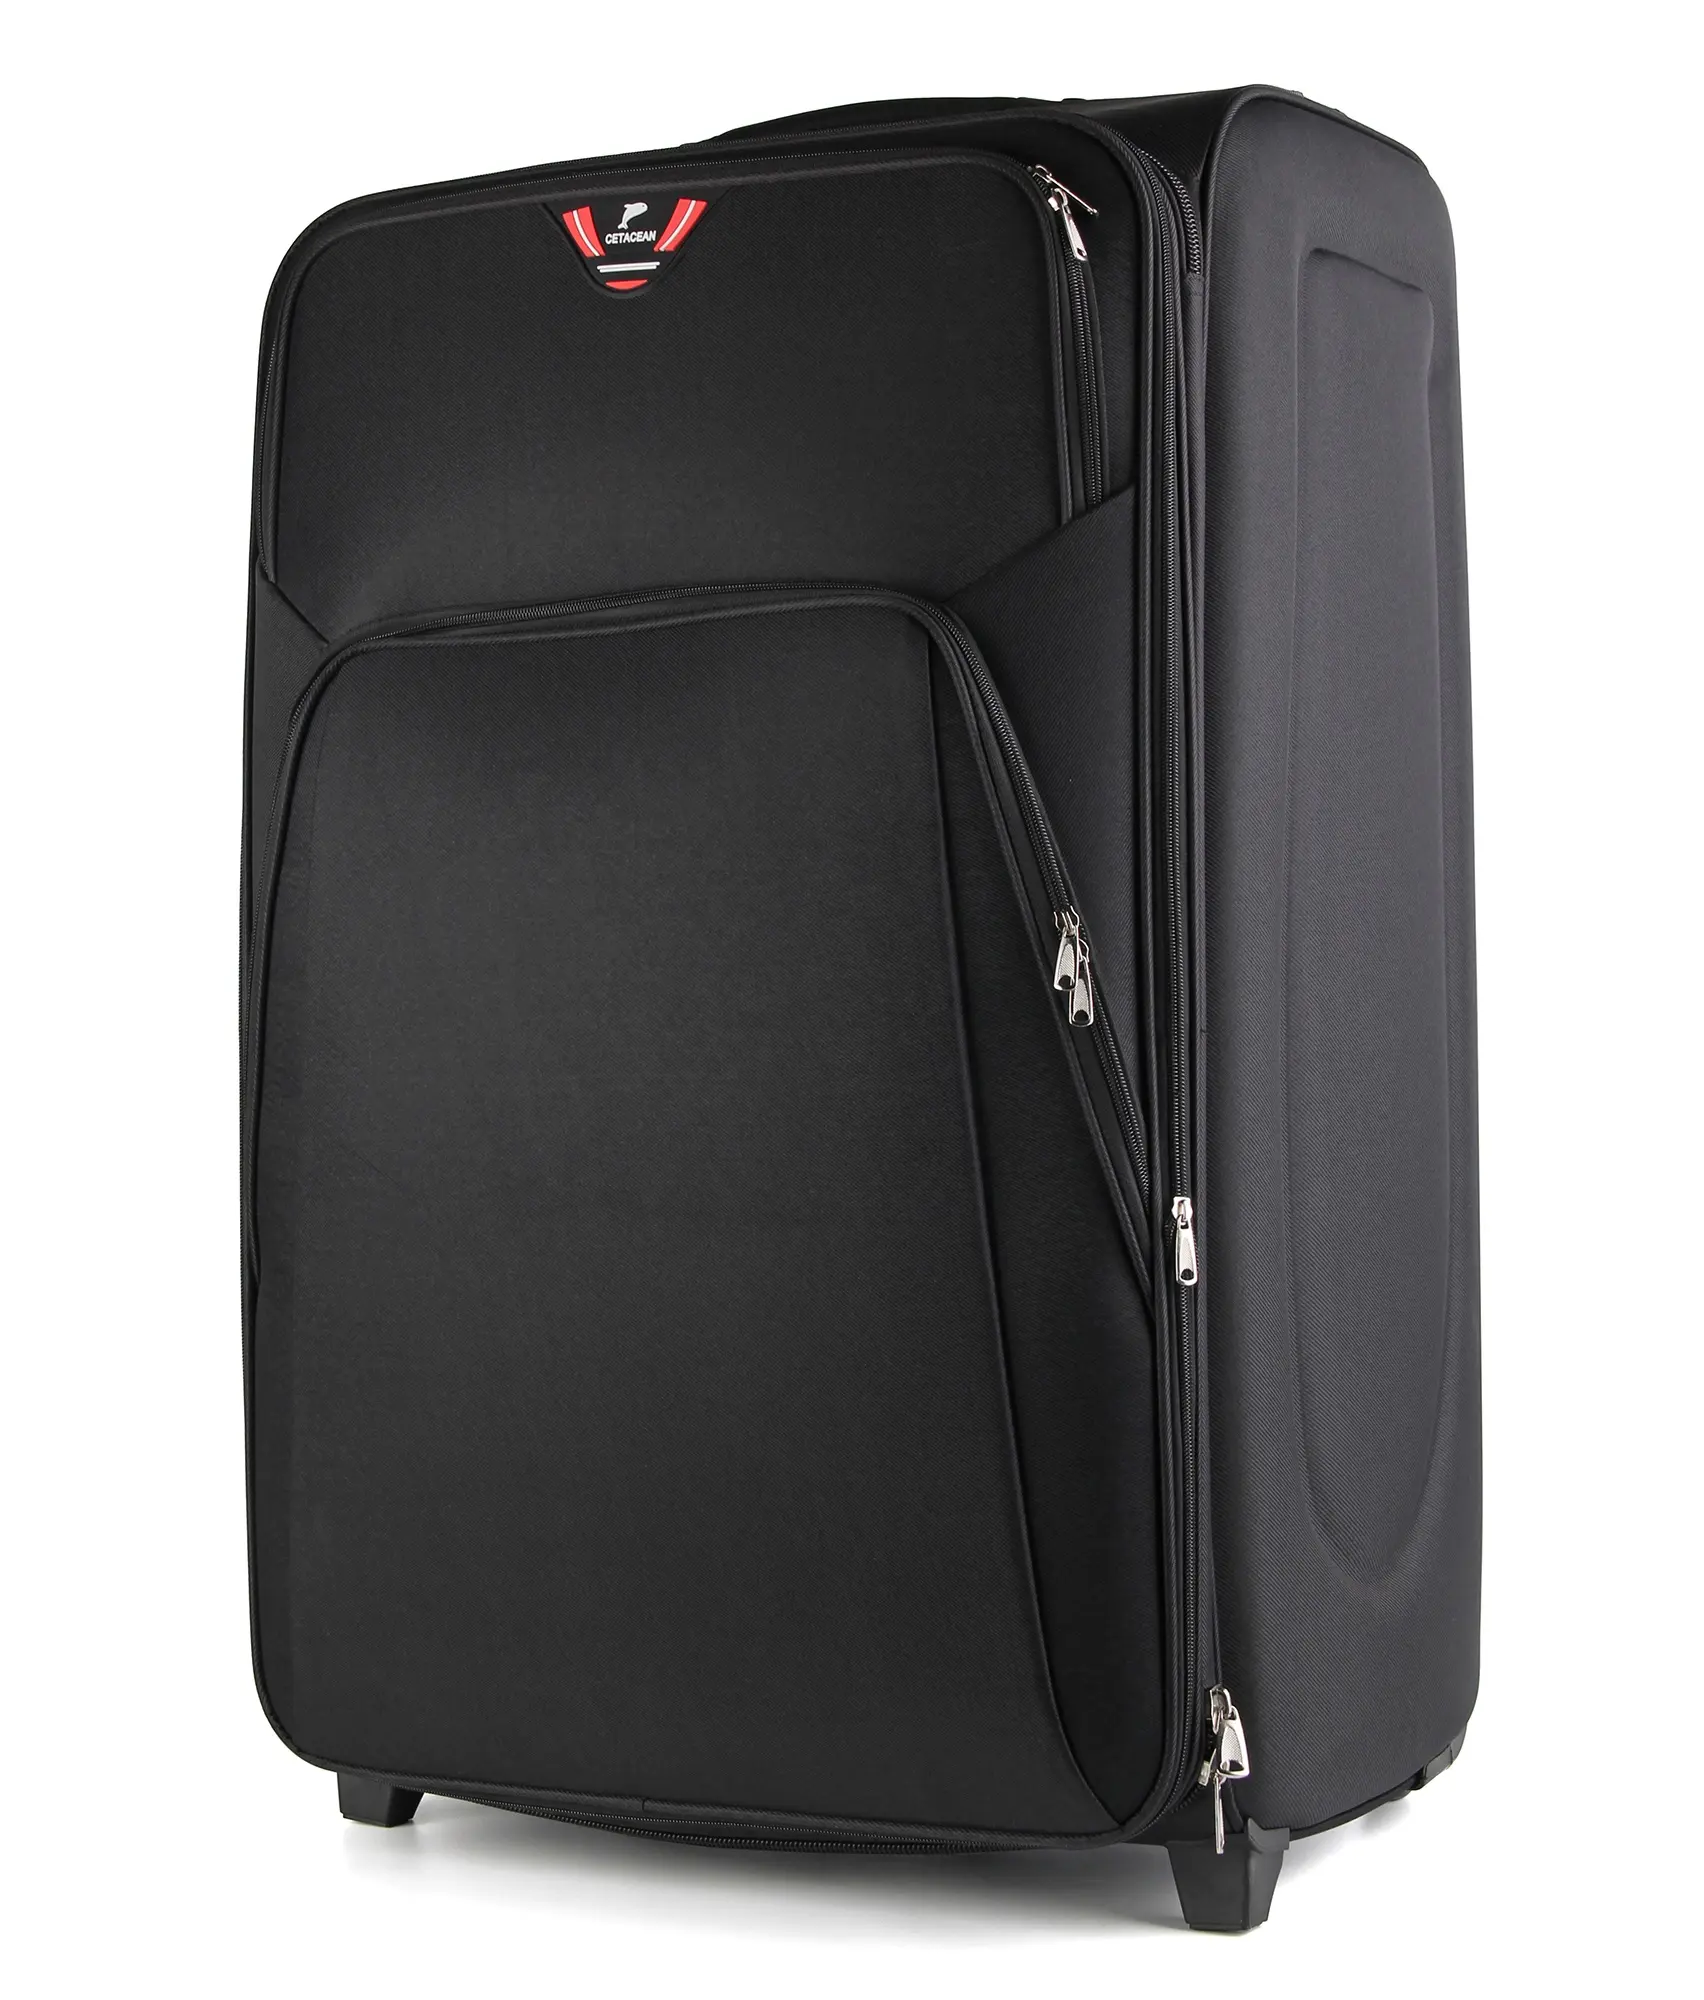 20"/24"/28"/32" big suitcase soft luggage trolley case luggage bags for traveling